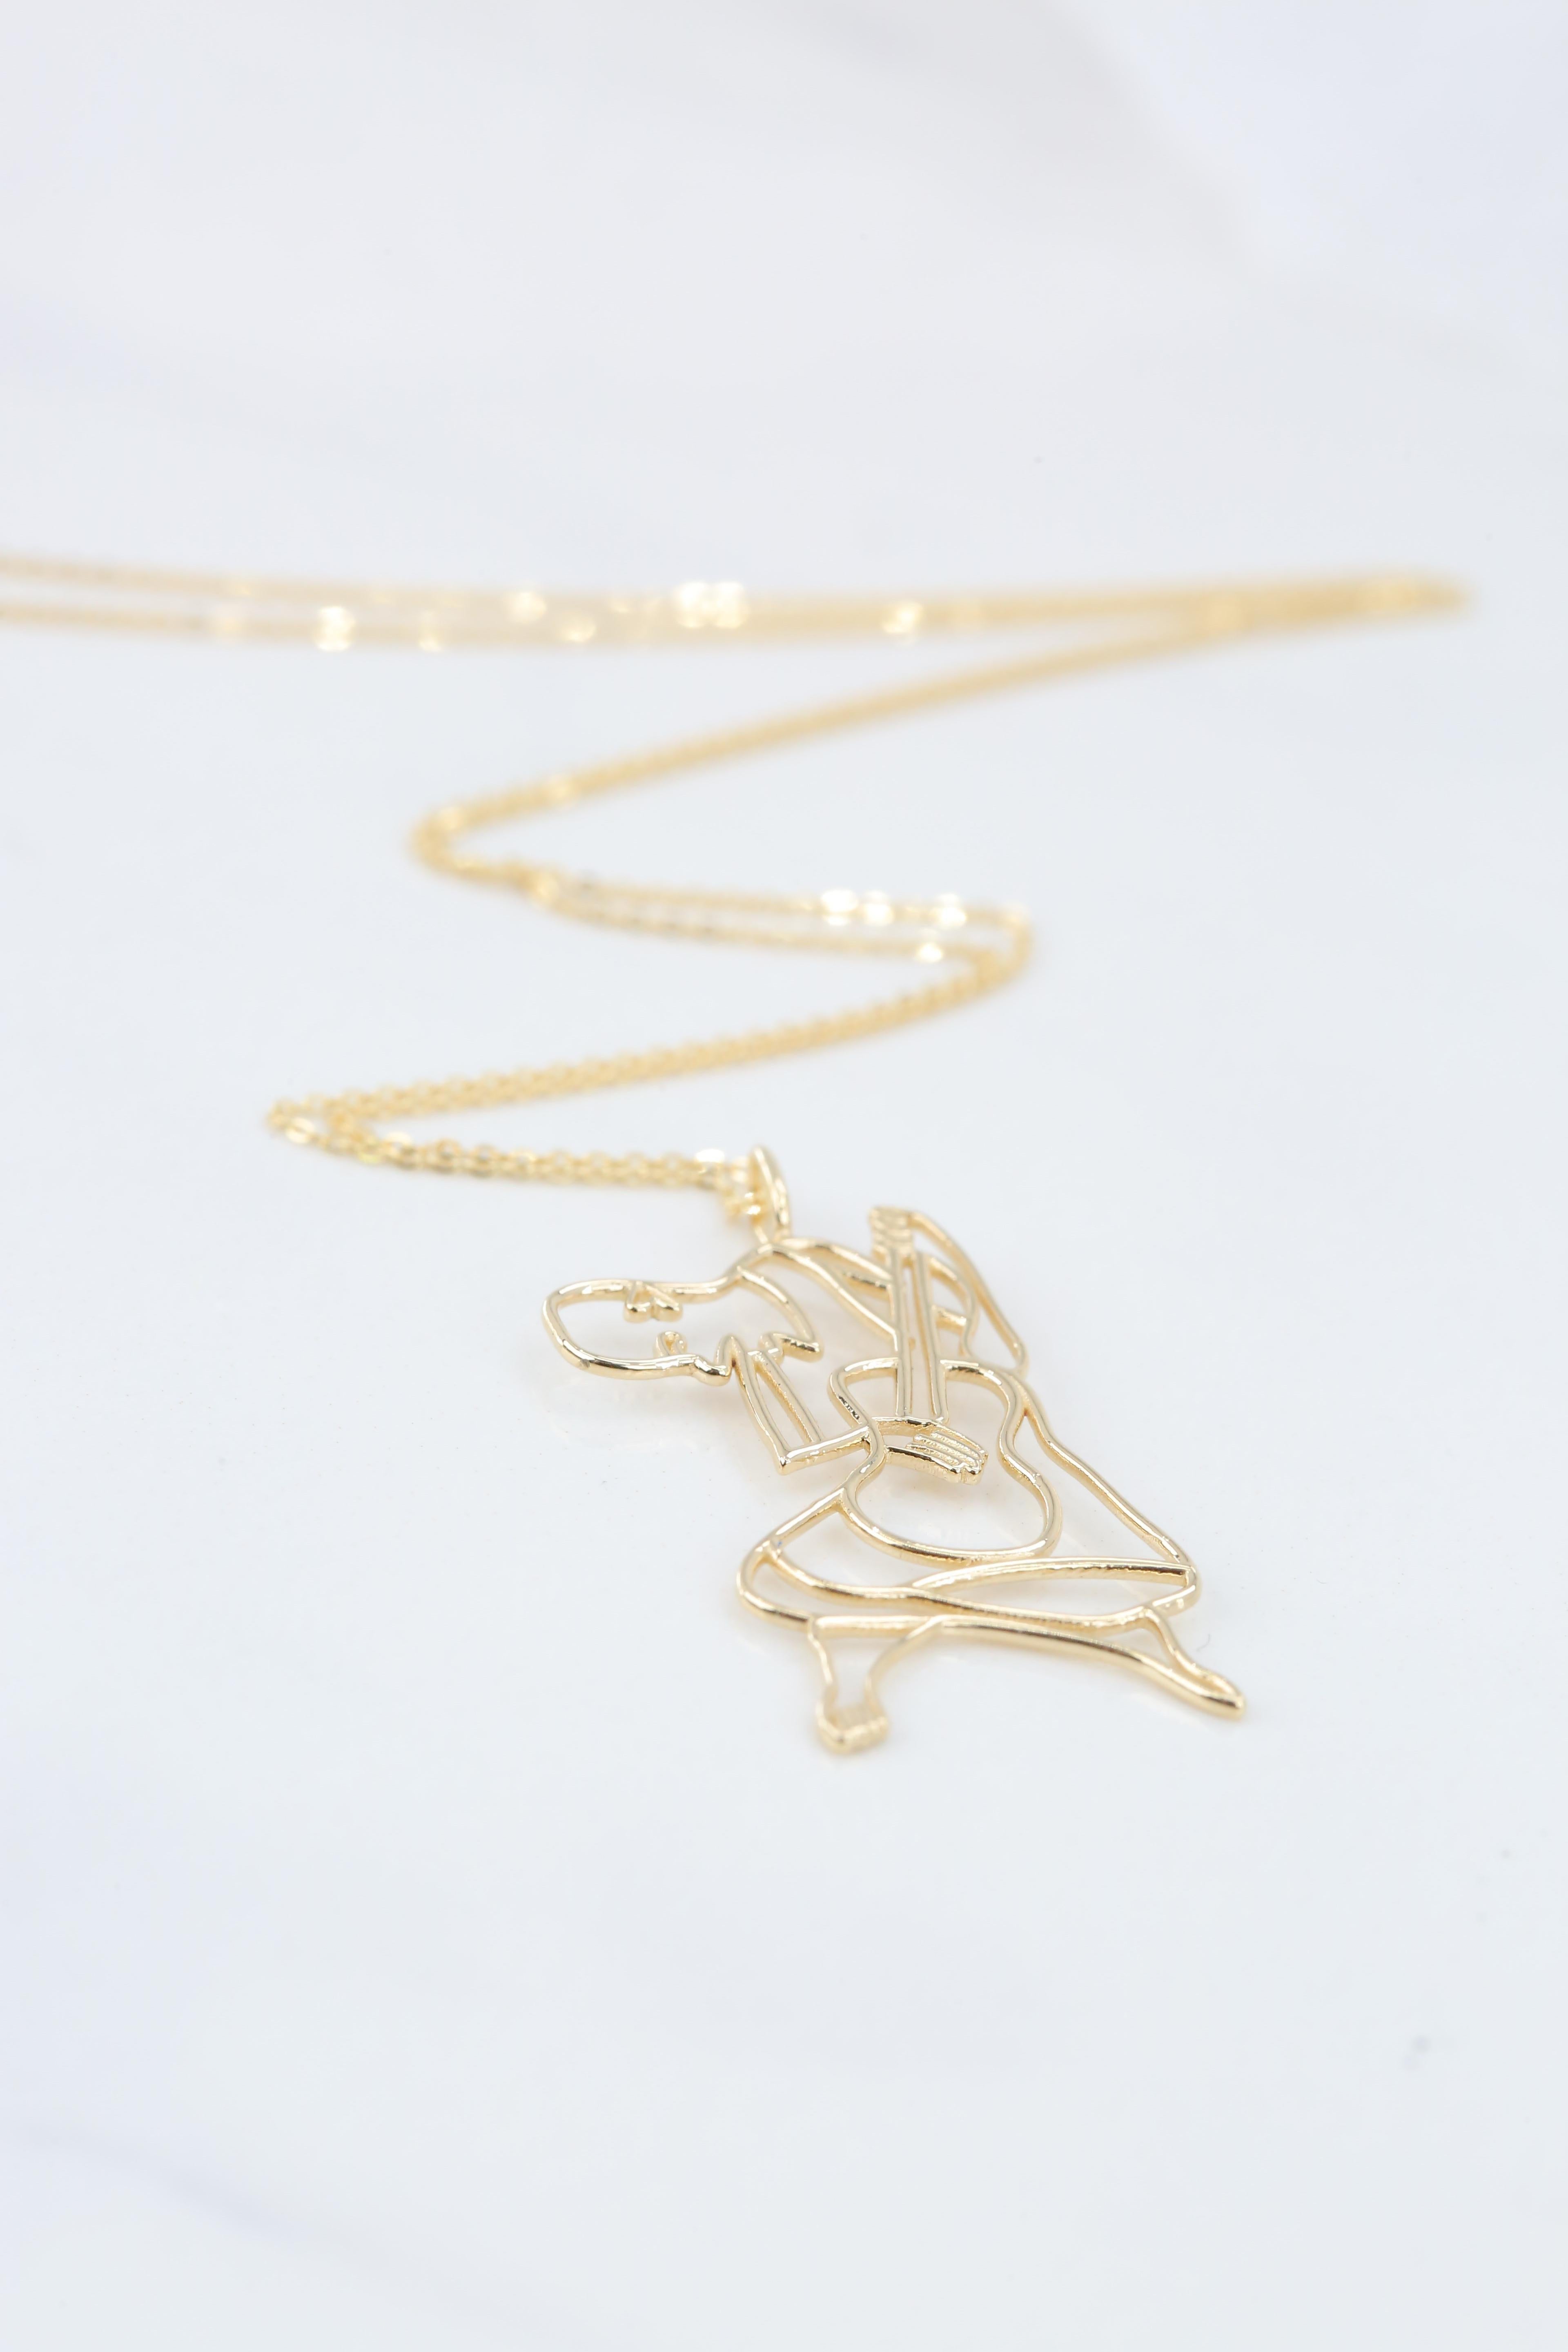 Women's or Men's 14K Gold Cubic Guitarist Necklace, Inspired by Picasso's 